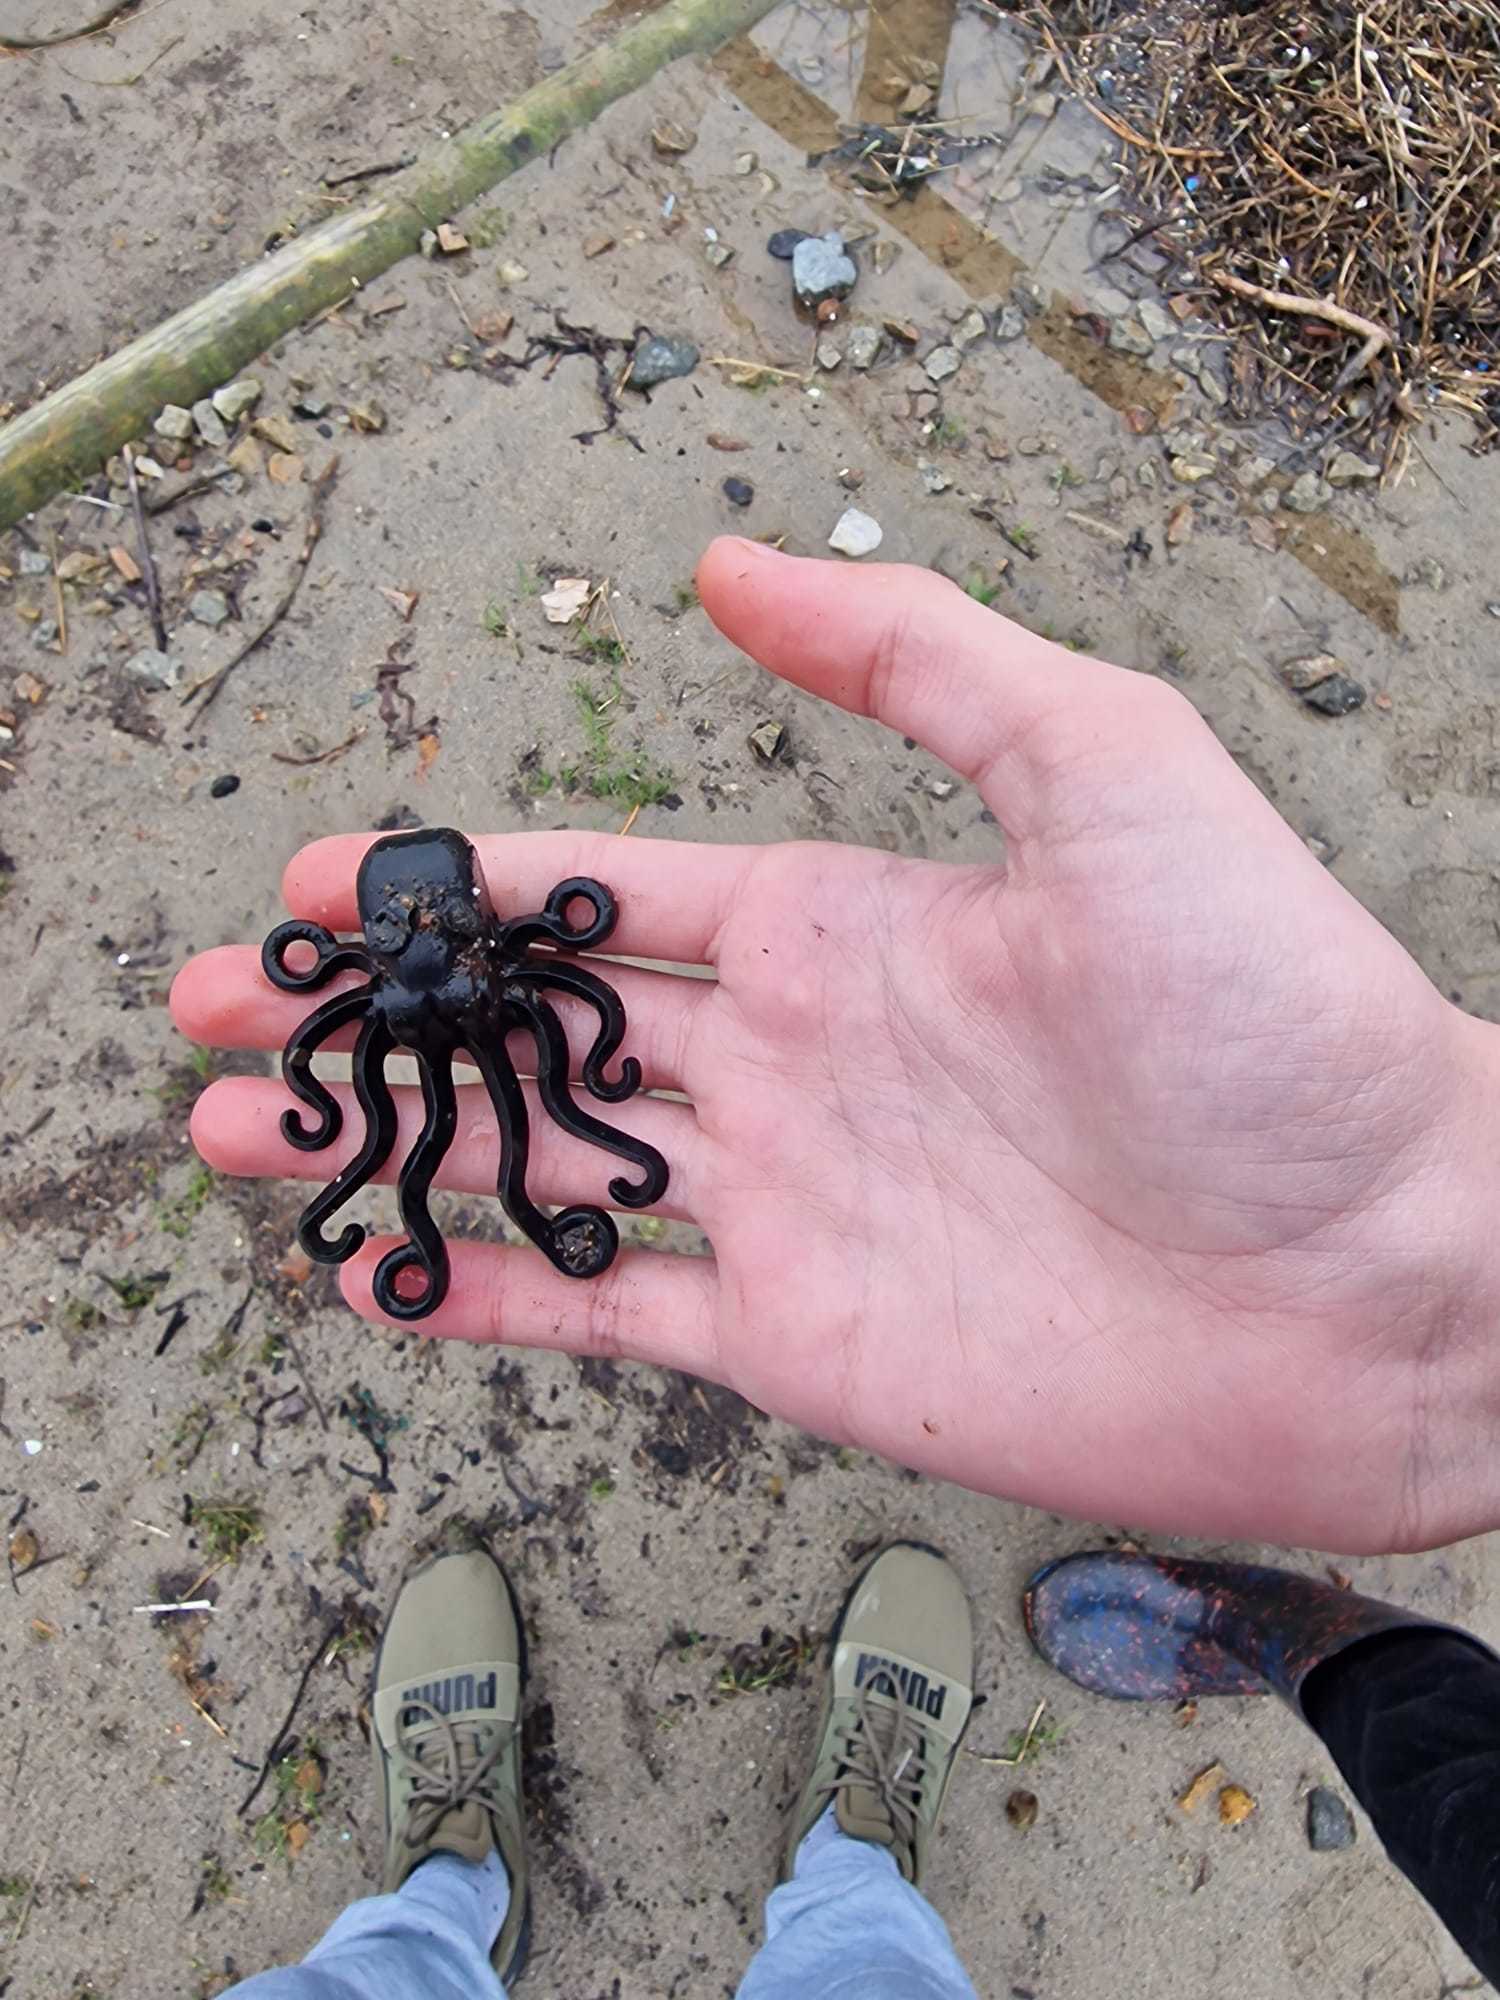  Liutauras Cemolonskas, 13, holding a 'holy grail' Lego octopus piece which he found after it spilled into the sea from a shipping container in the 1990s. 